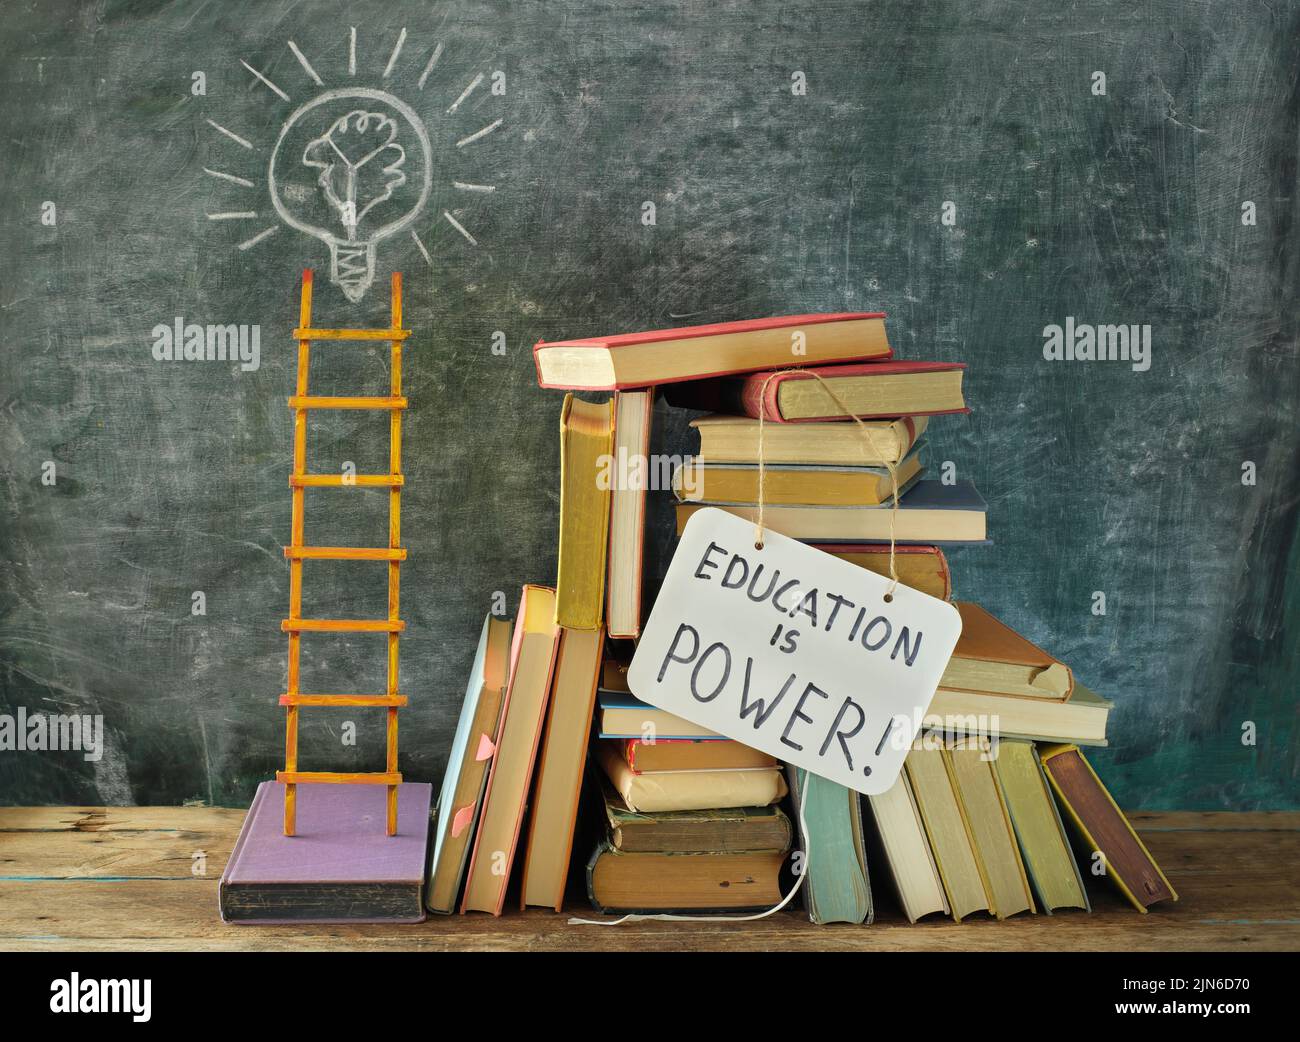 Learning,knowledge,education or back to school concept with books, education is power sign, lightbulb, idea symbol and ladder of success.Free copy spa Stock Photo